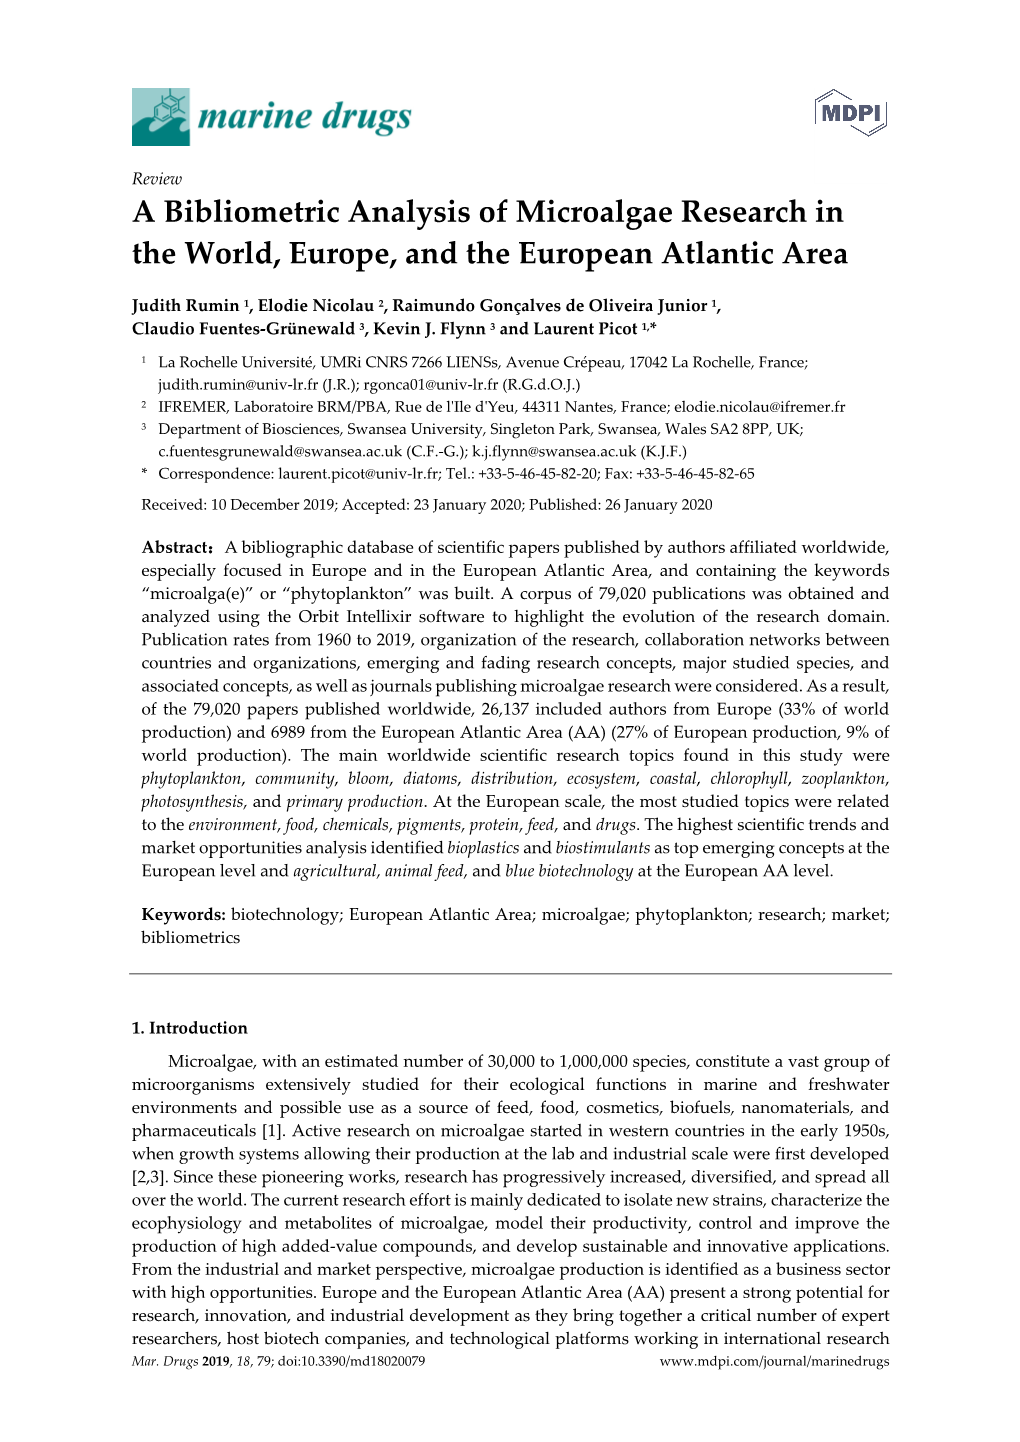 A Bibliometric Analysis of Microalgae Research in the World, Europe, and the European Atlantic Area